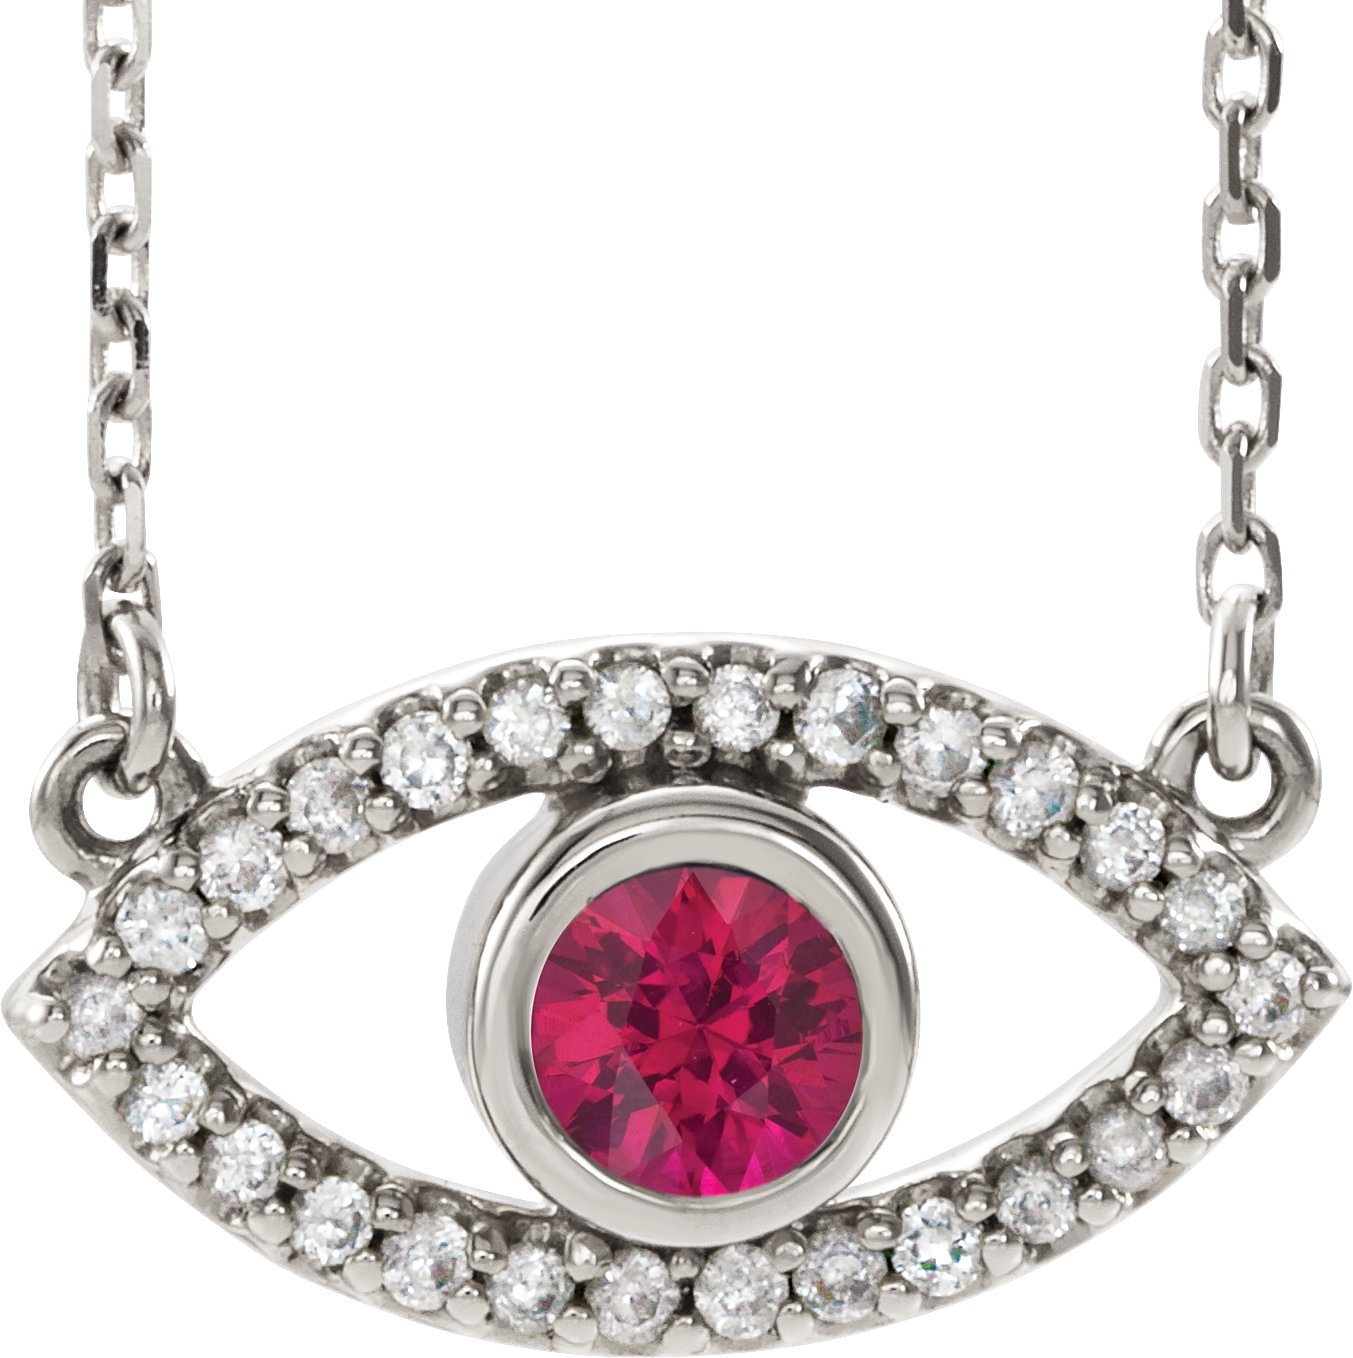 Sterling Silver Ruby and White Sapphire Evil Eye 18 inch Necklace Ref. 14901650